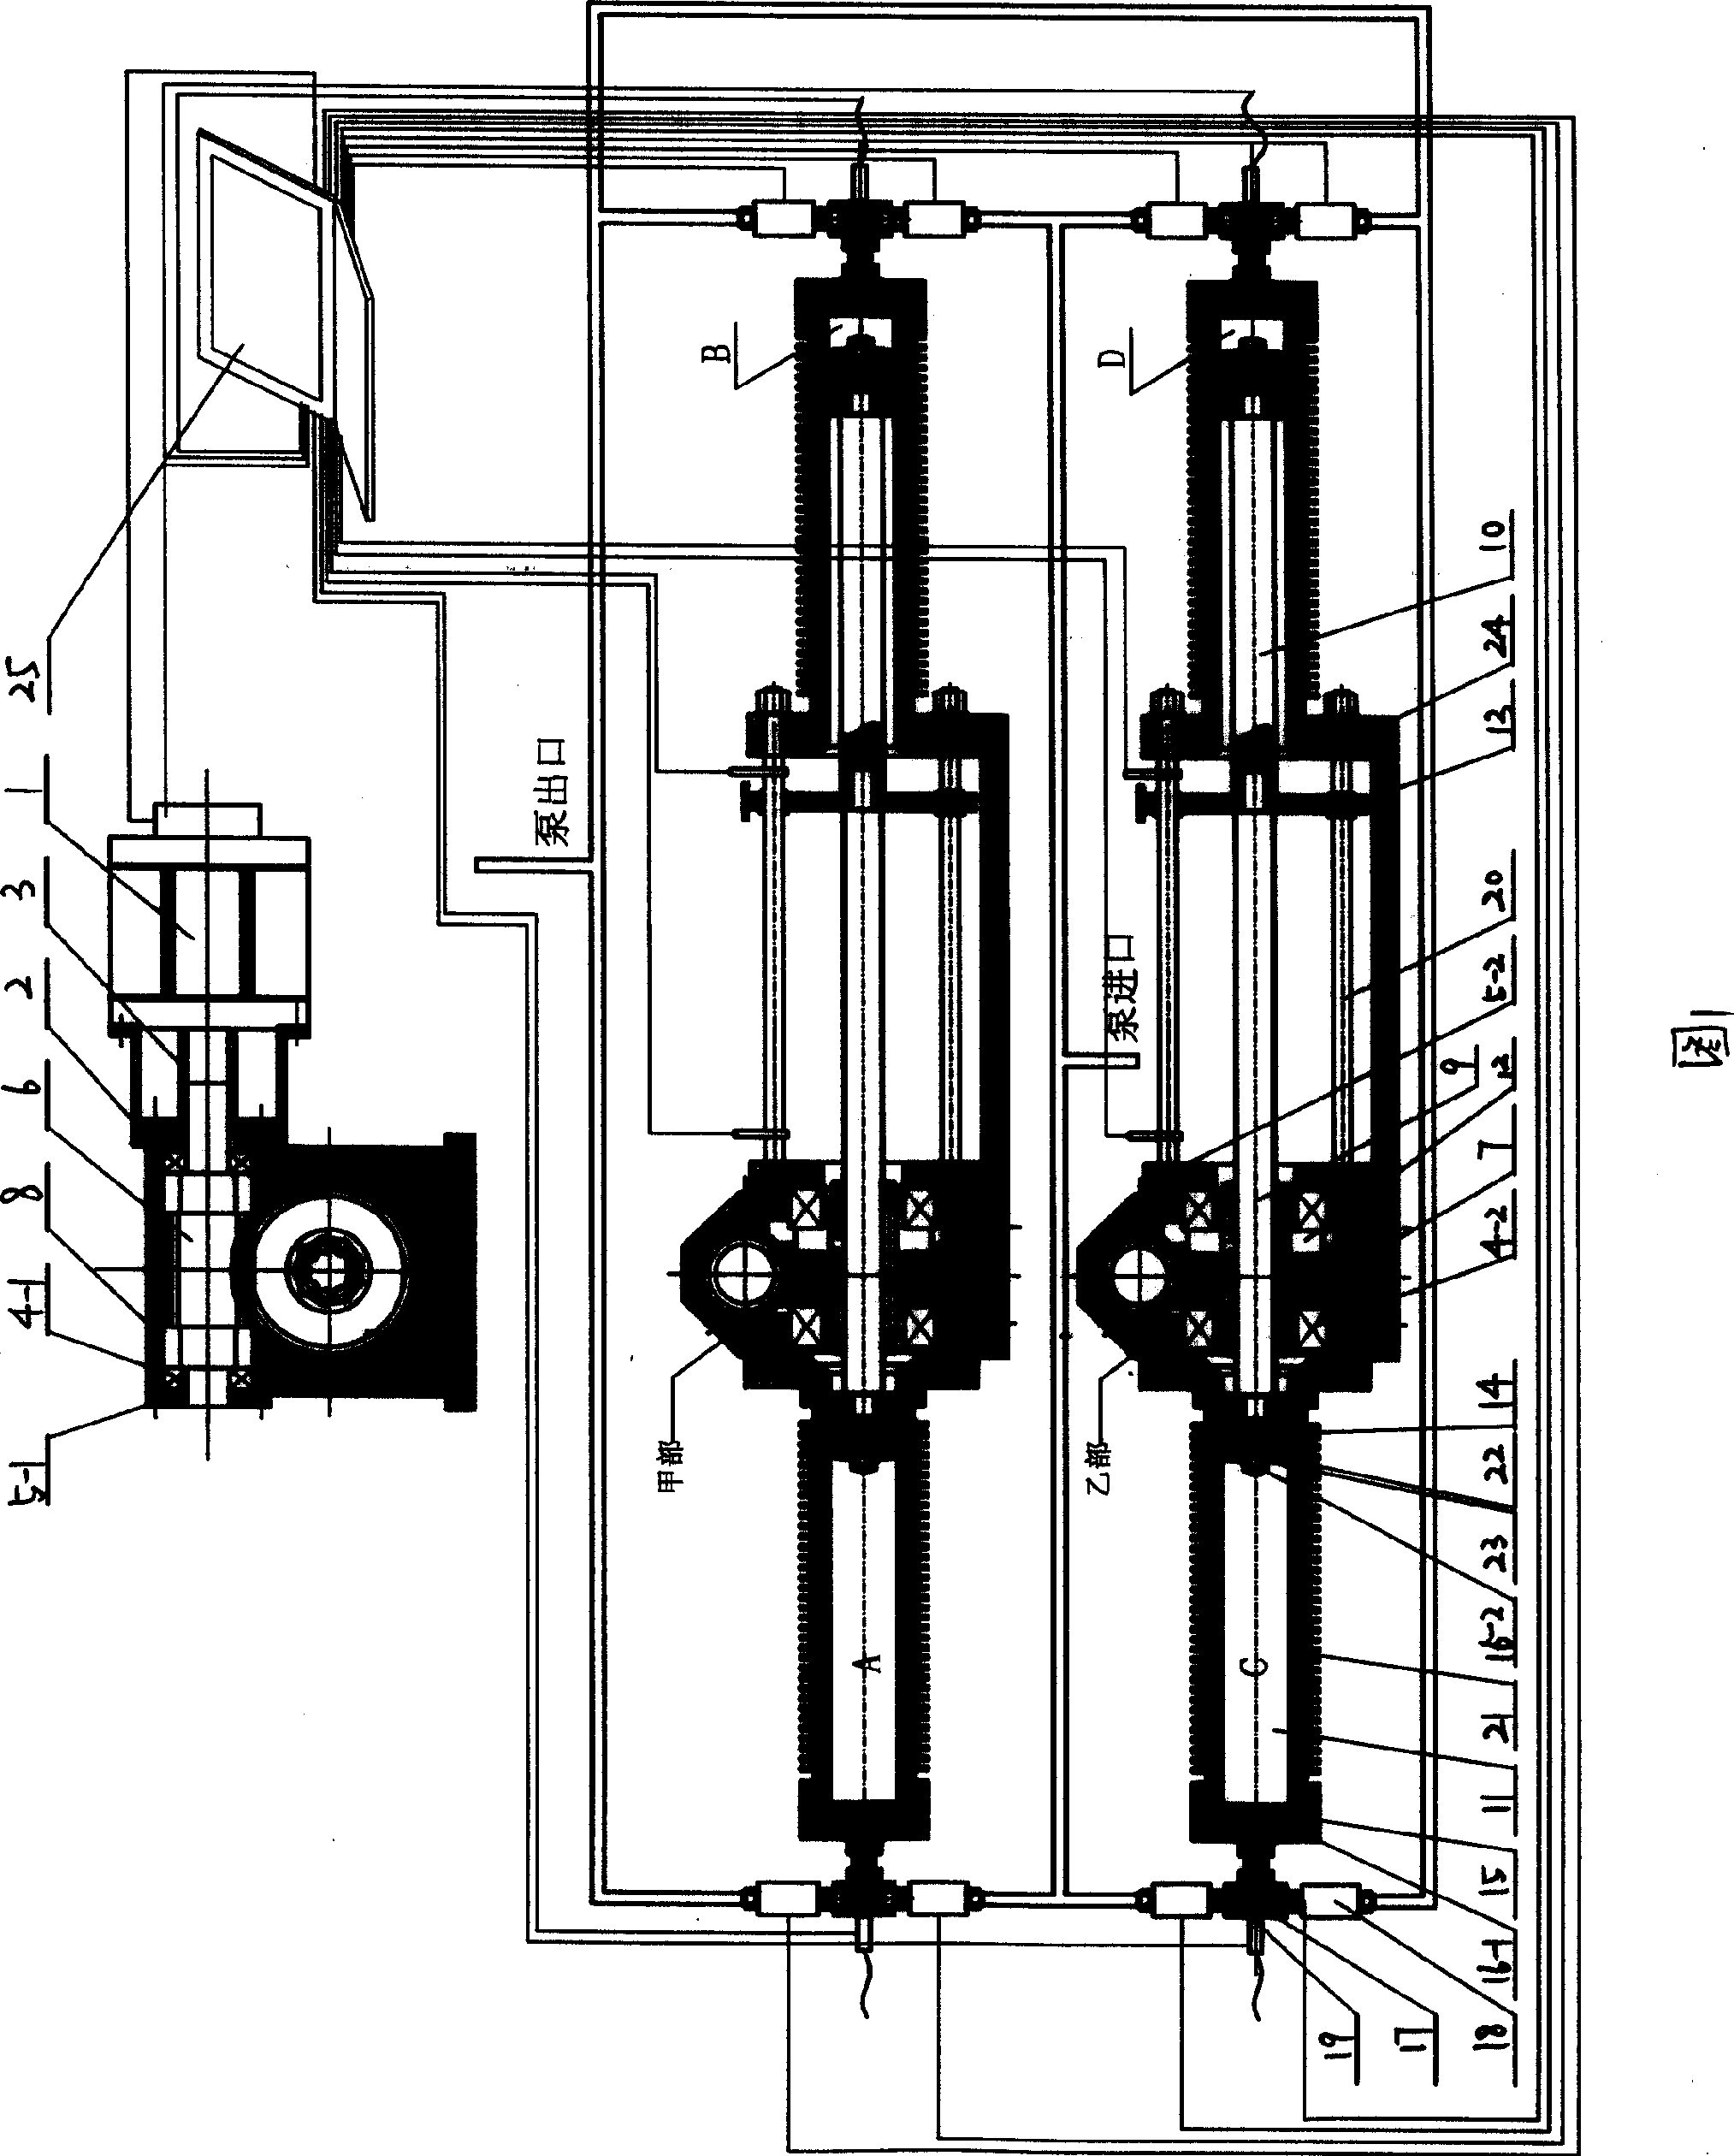 Metering pump with constant speed and constant pressure